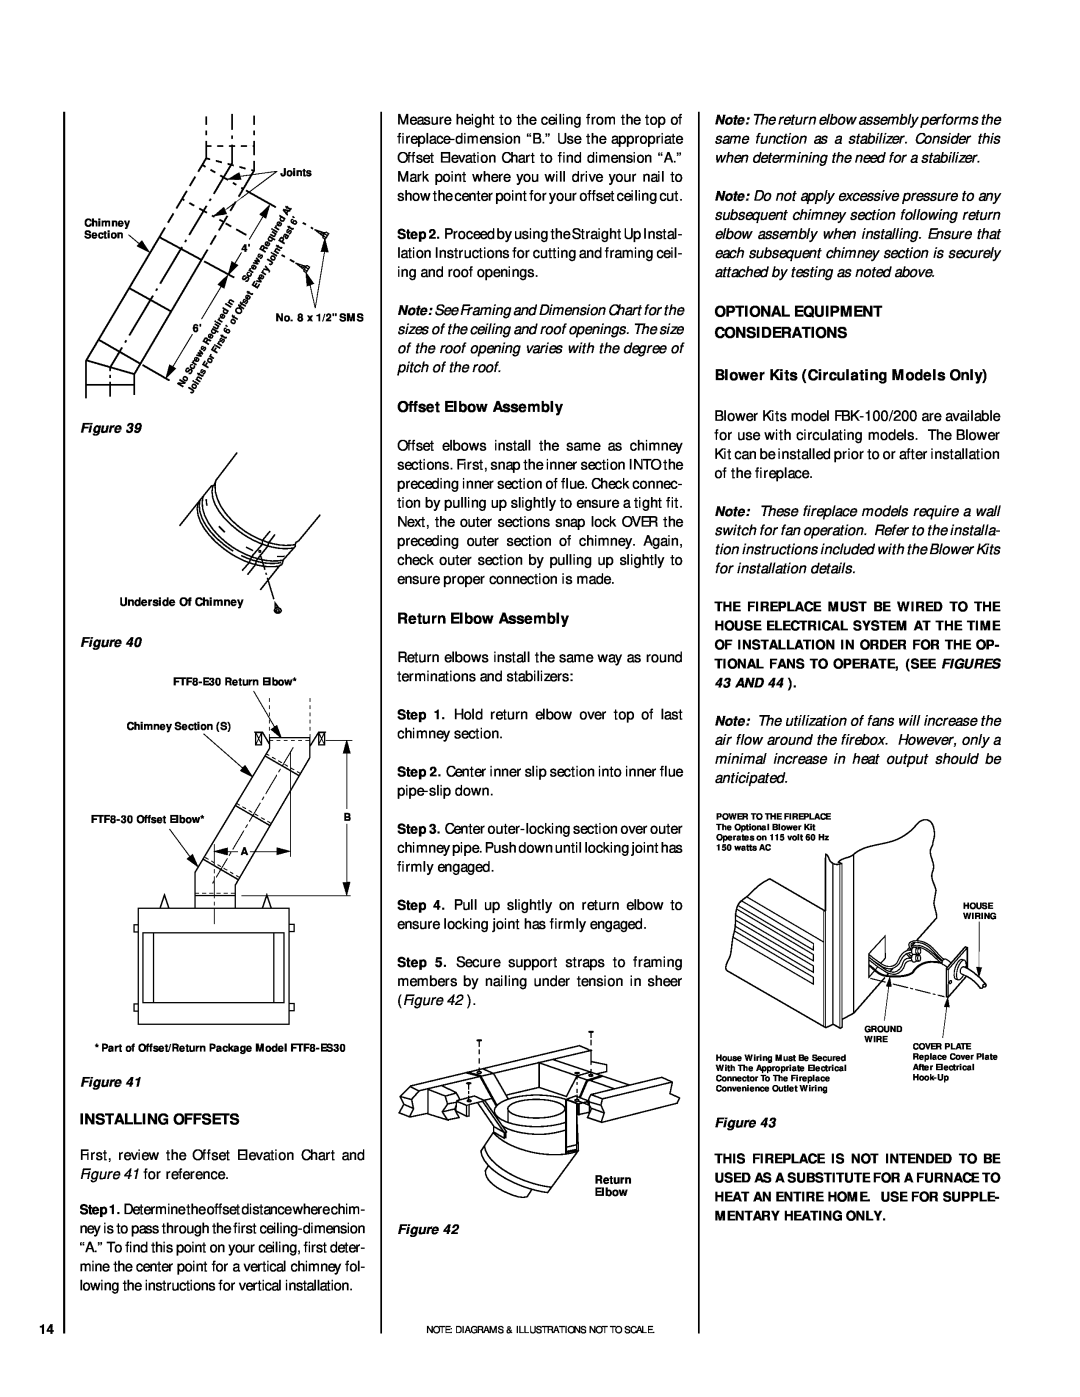 Linksys RDI-36-H HCI-36-H installation instructions Installing Offsets, Offset Elbow Assembly, Return Elbow Assembly 